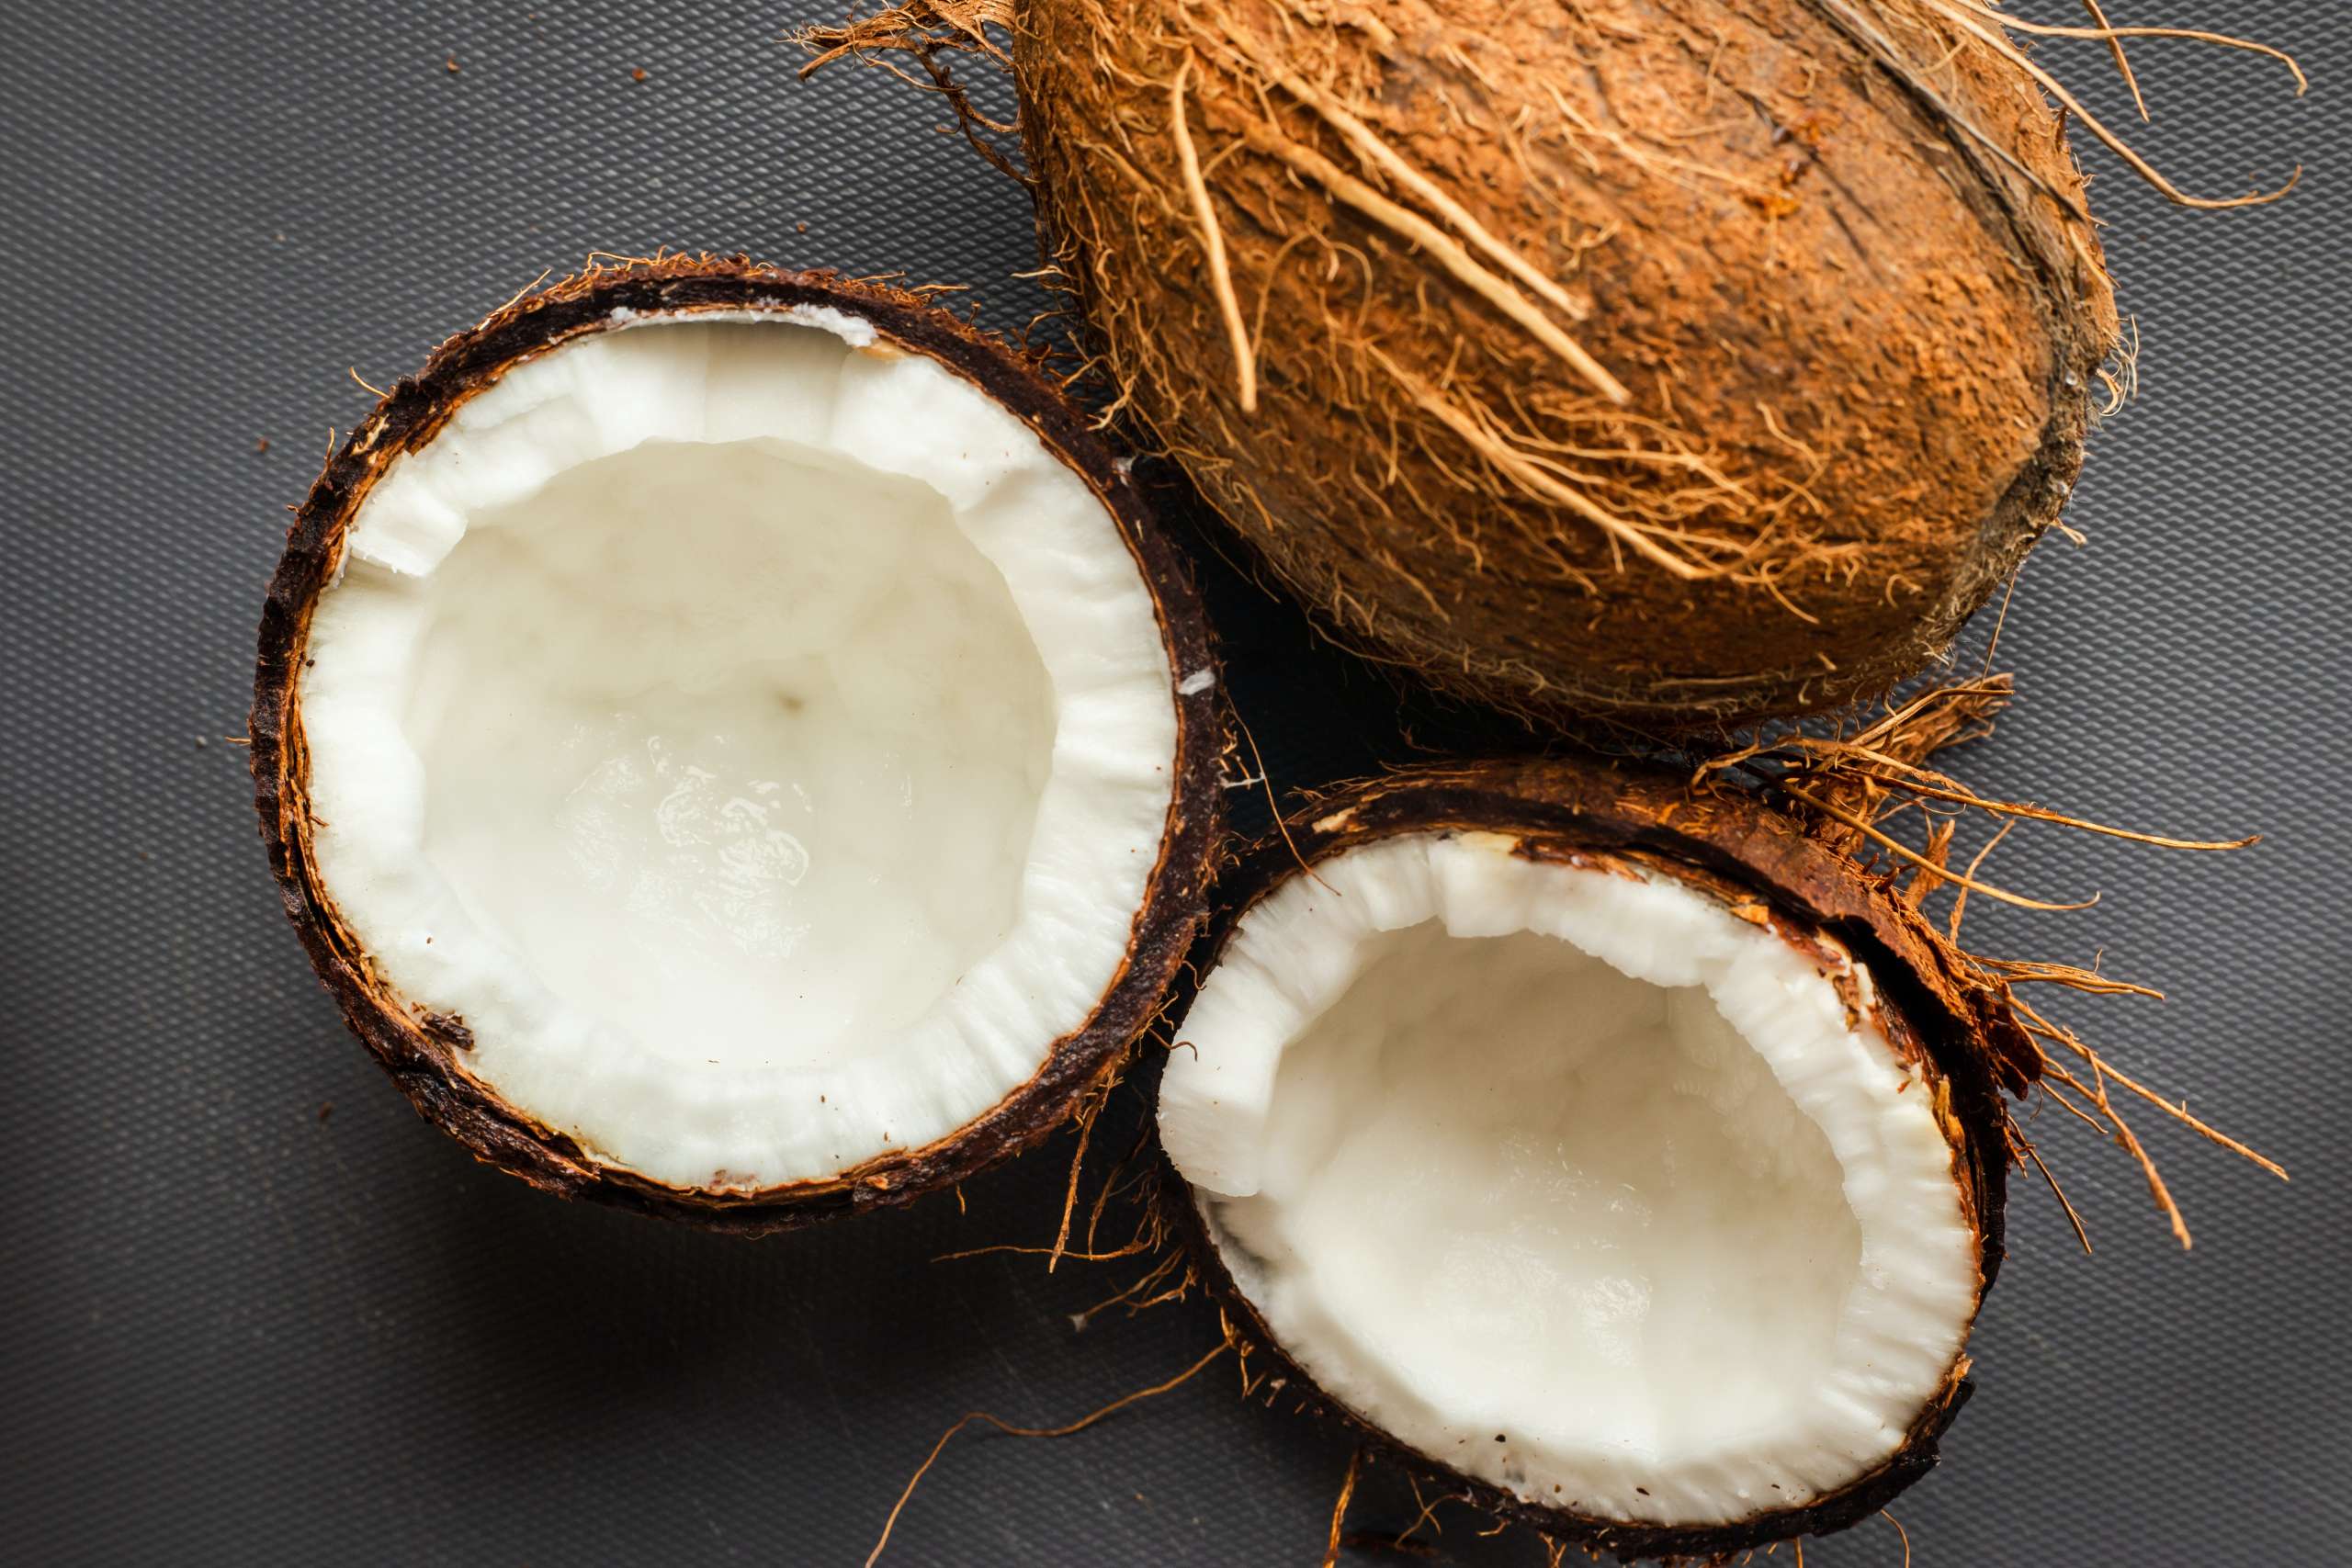 Coconut oil and Coconut oil benefits, the Friendly hair nourisher.